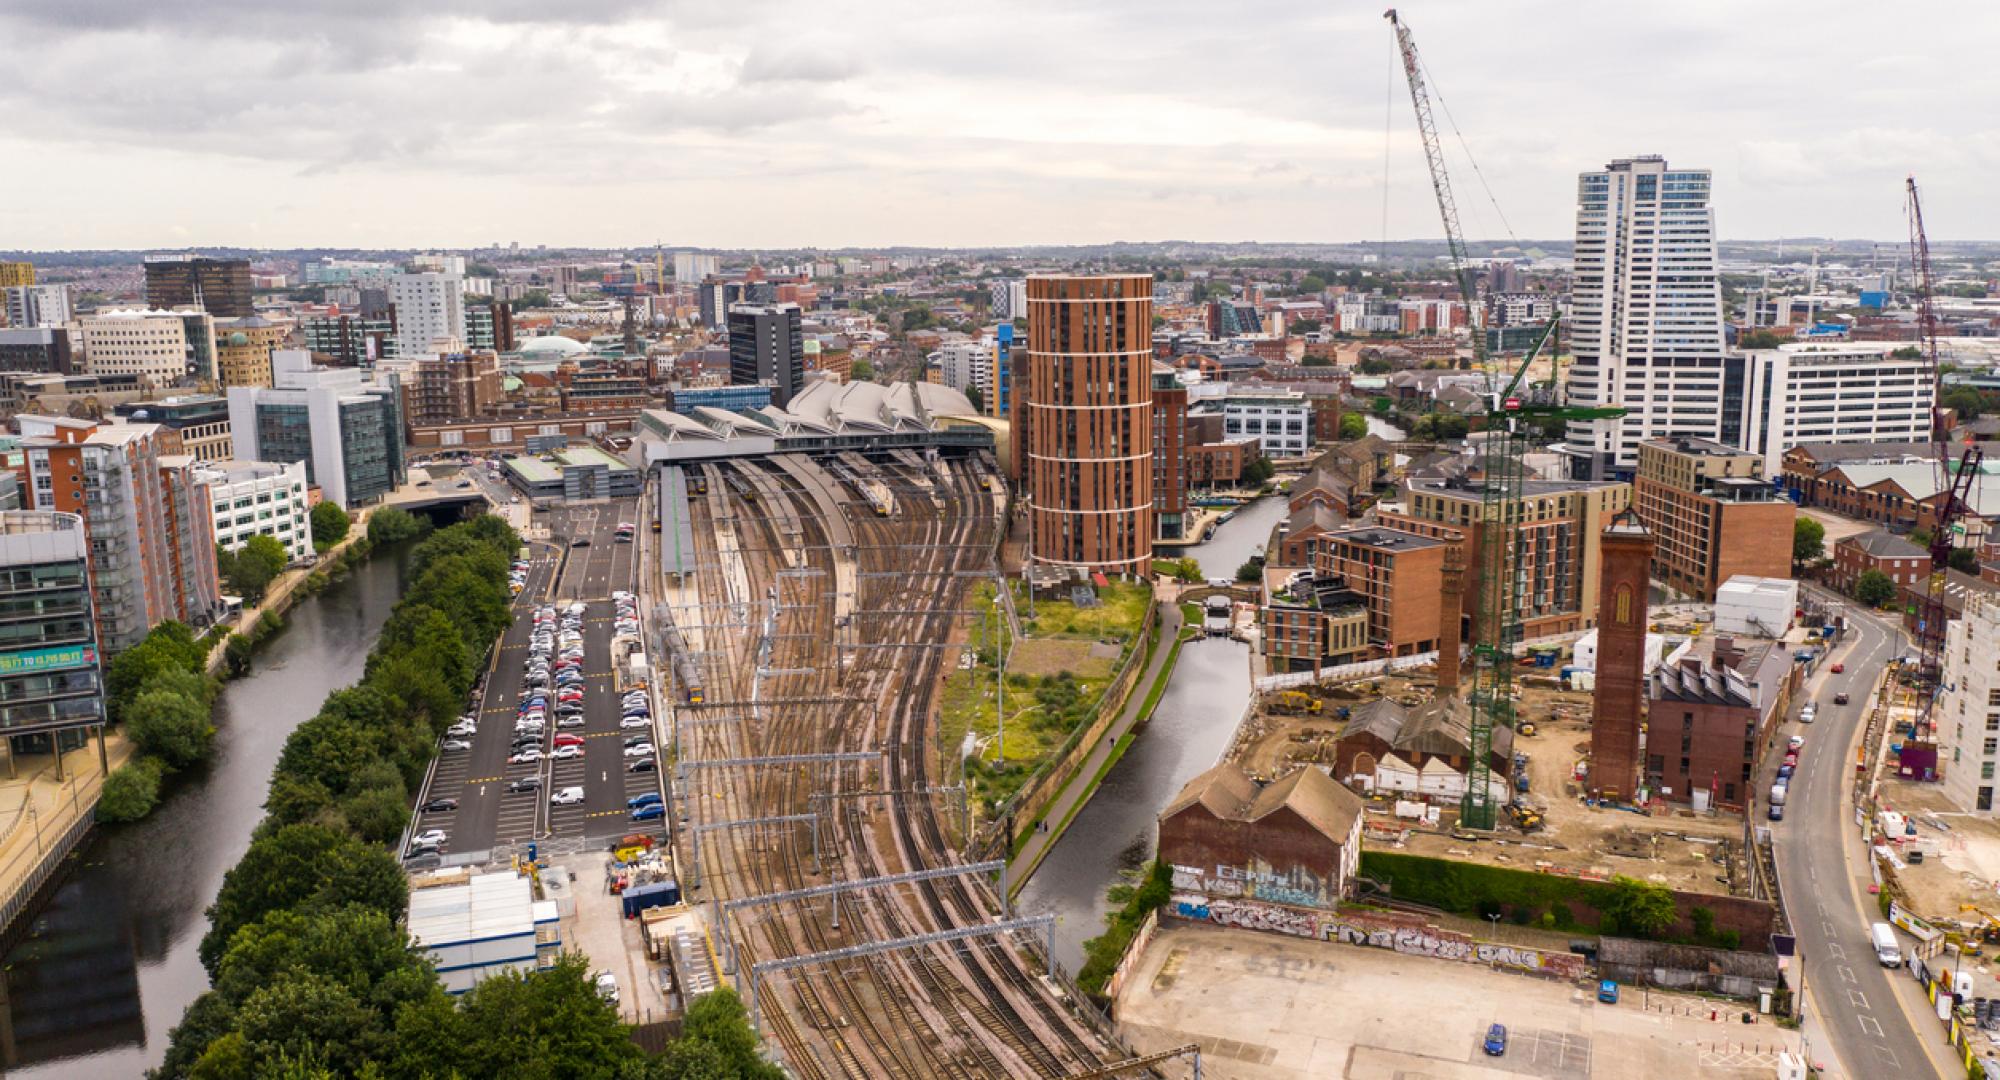 Aerial view of Leeds city centre and railway station